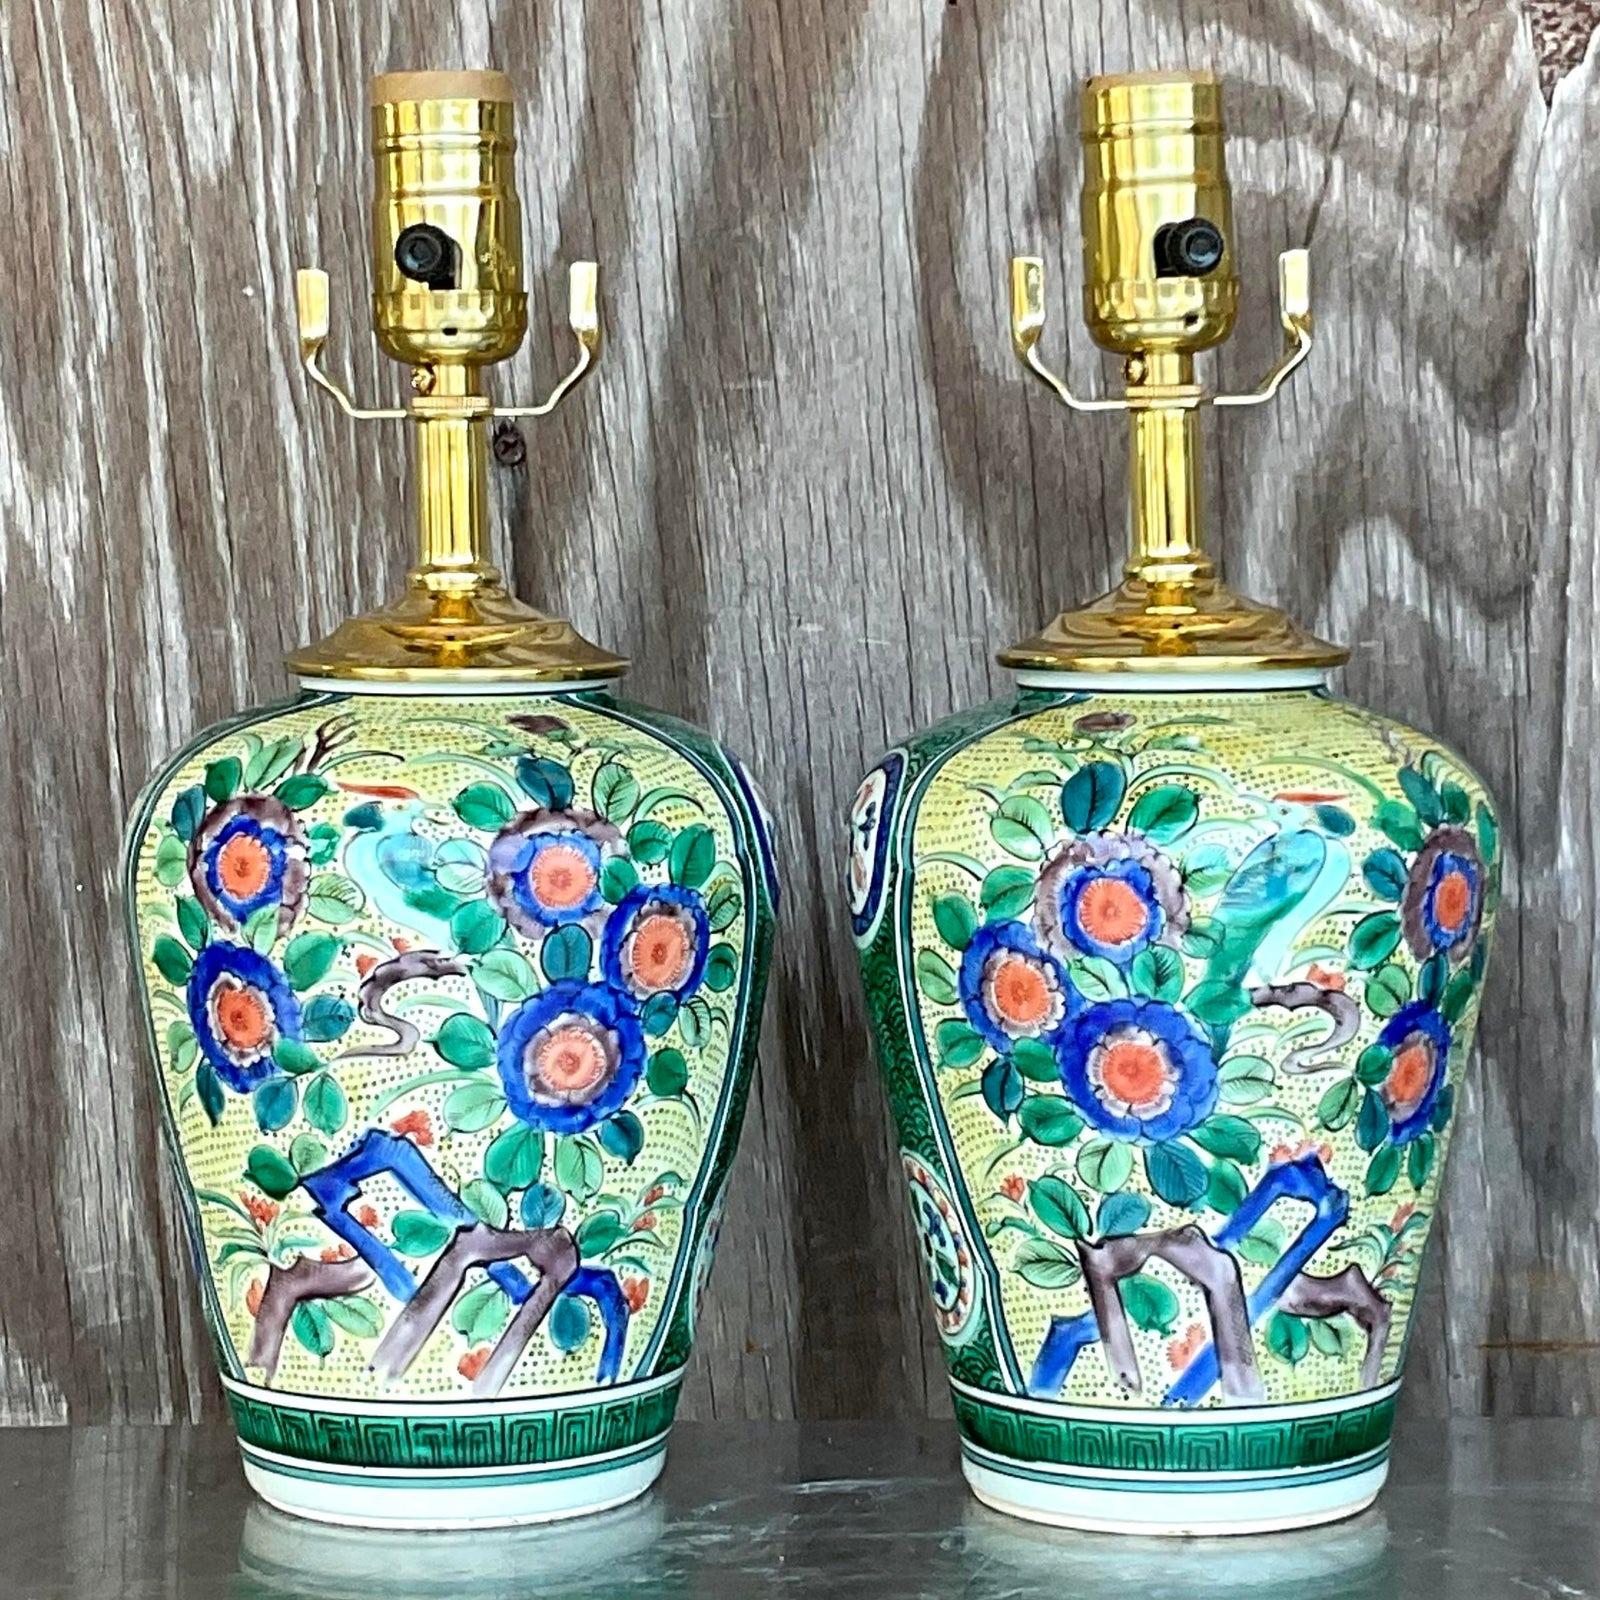 20th Century Vintage Asian Glazed Ceramic Floral Table Lamps - a Pair For Sale